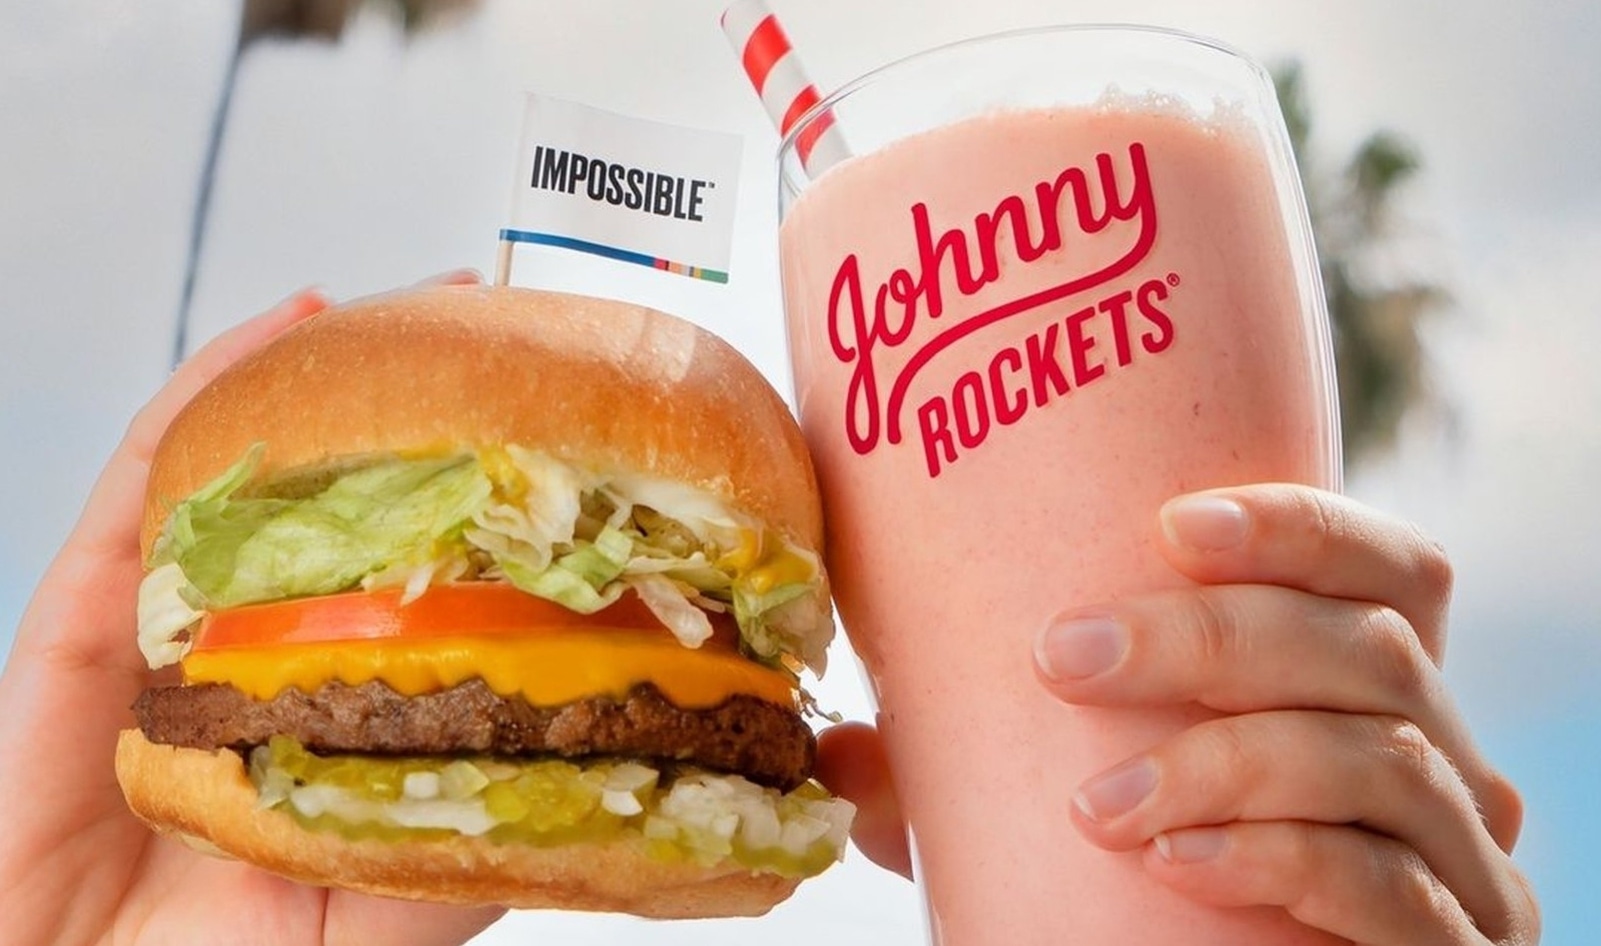 Here's How to Order Vegan at Johnny Rockets&nbsp;